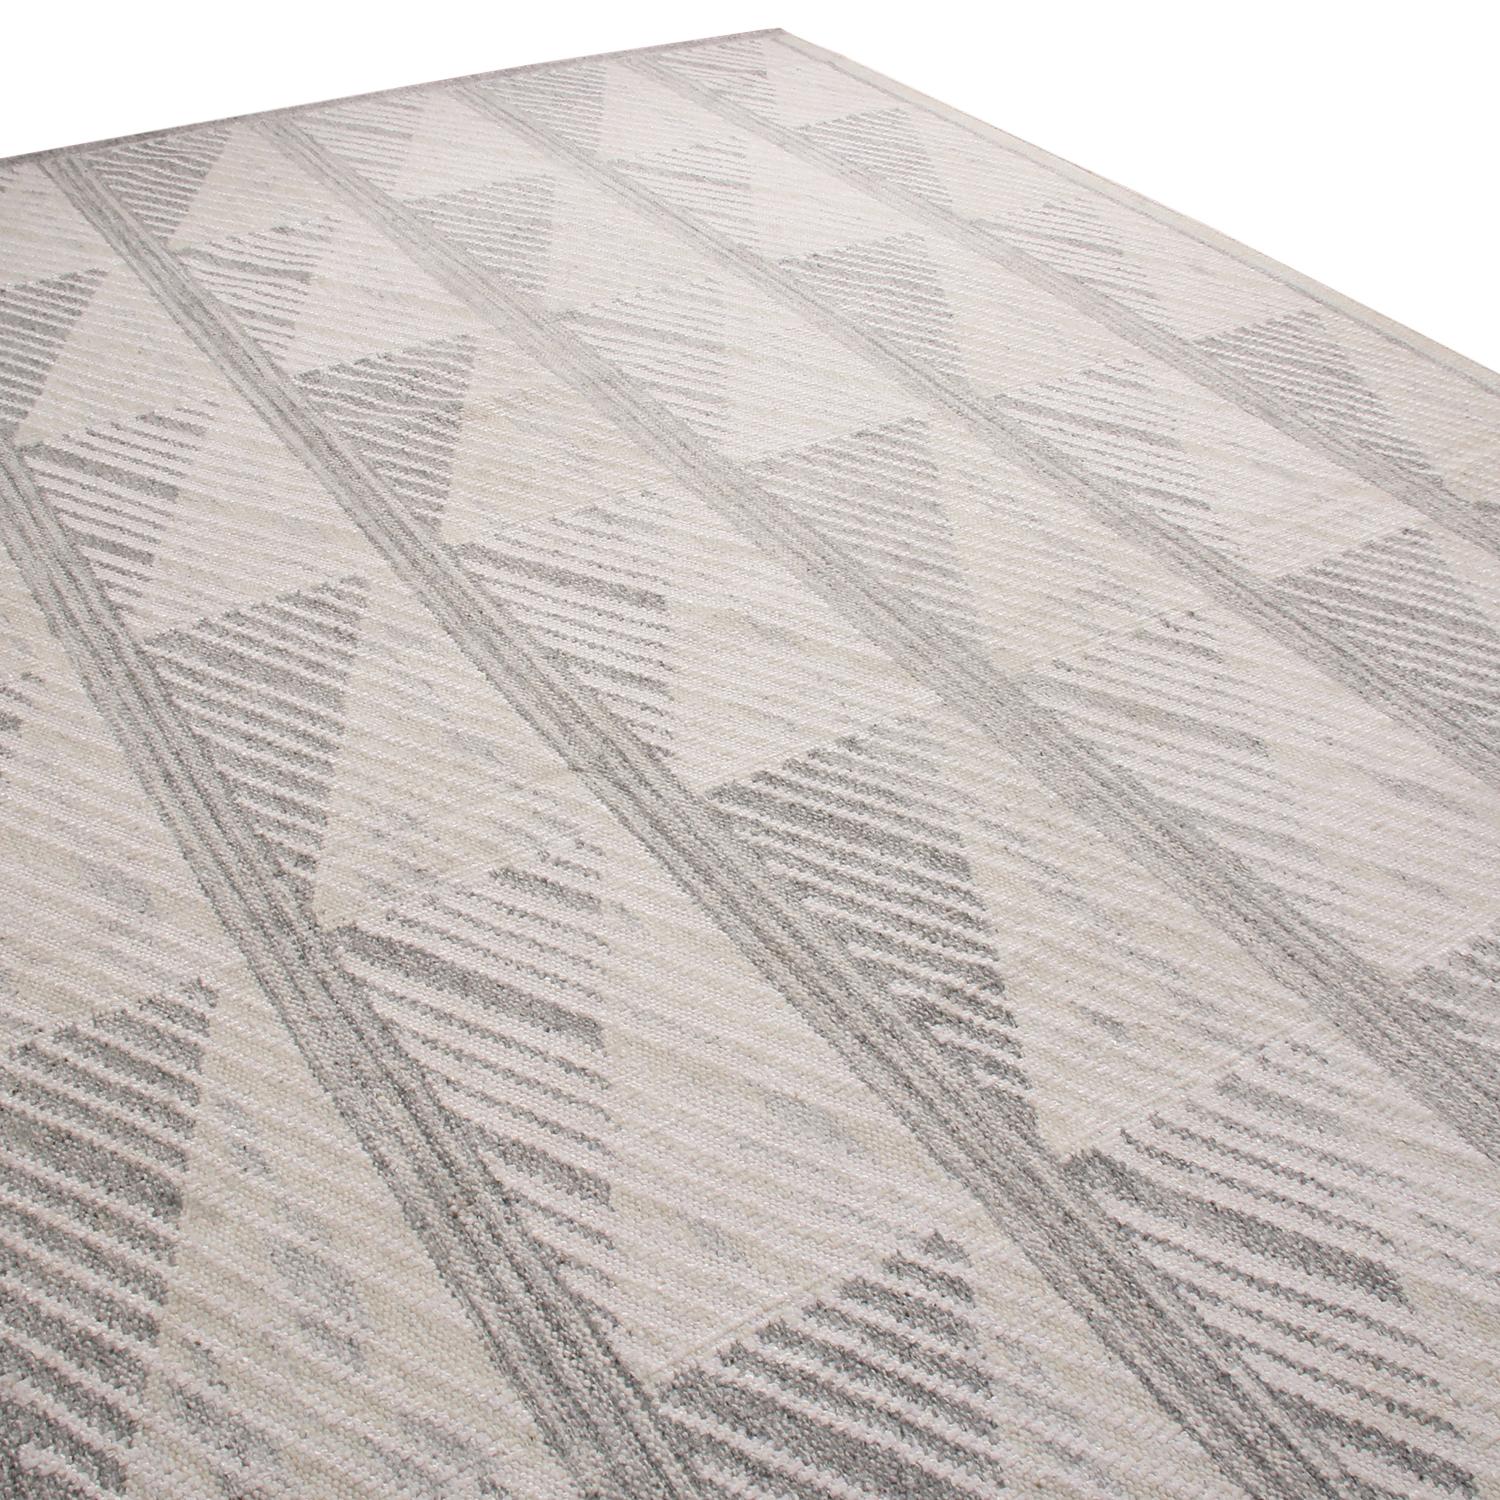 Rug & Kilim’s hand-woven Swedish-style rug hails from the latest wool flat weave additions to the Scandinavian Collection, offering our unique, refined large-scale approach to the geometry and vintage colorways like that of their mid-century